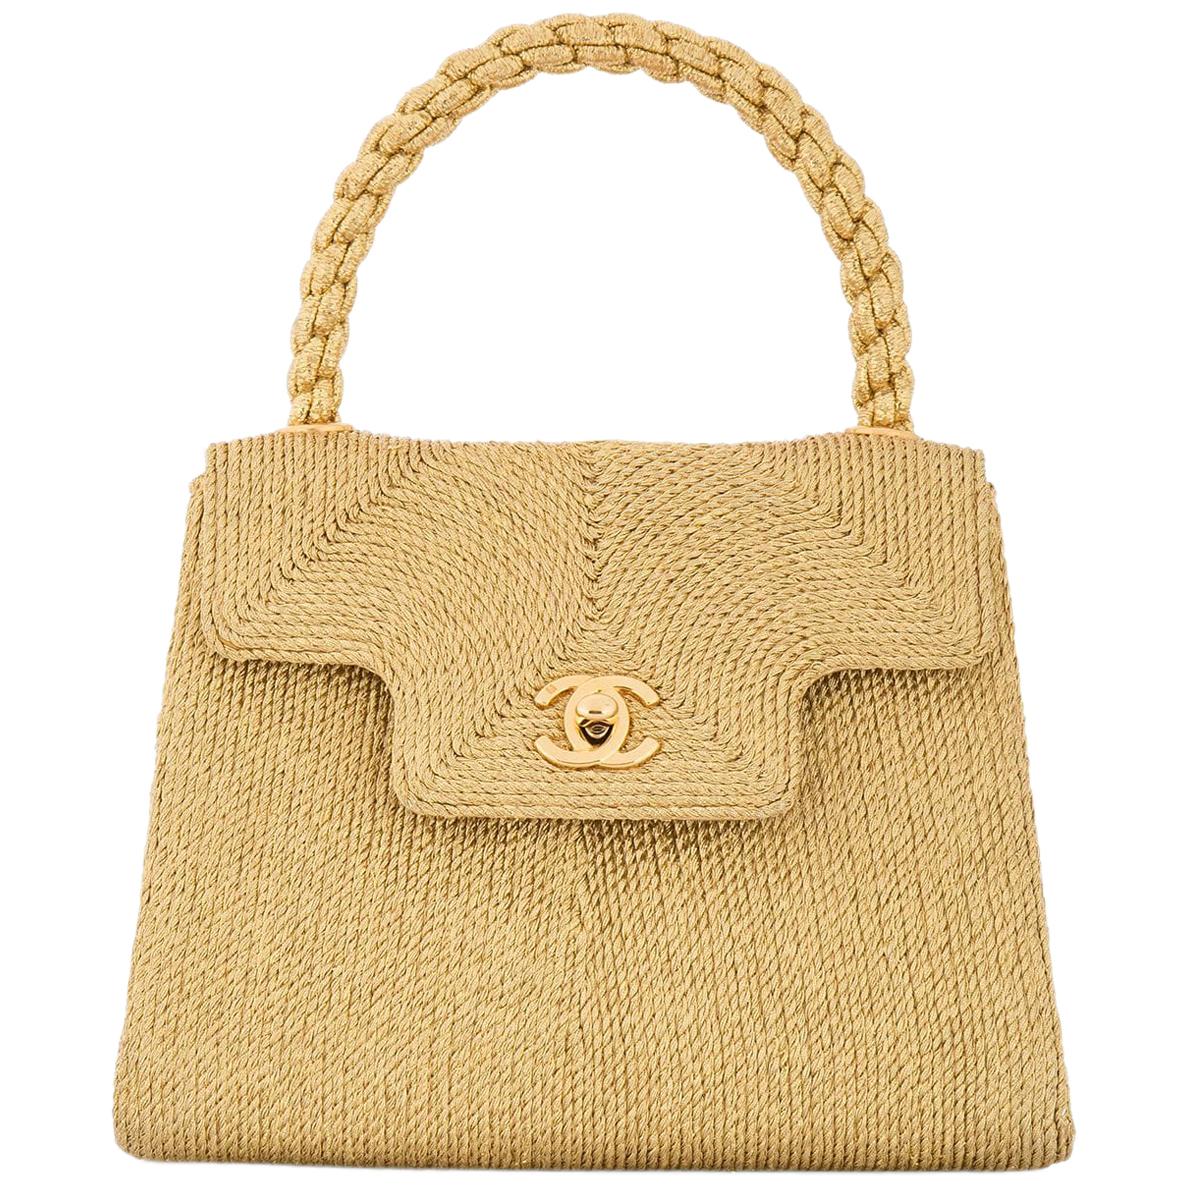 Chanel Rare LameGold Evening Top Handle Satchel Small Party Kelly Style Flap Bag